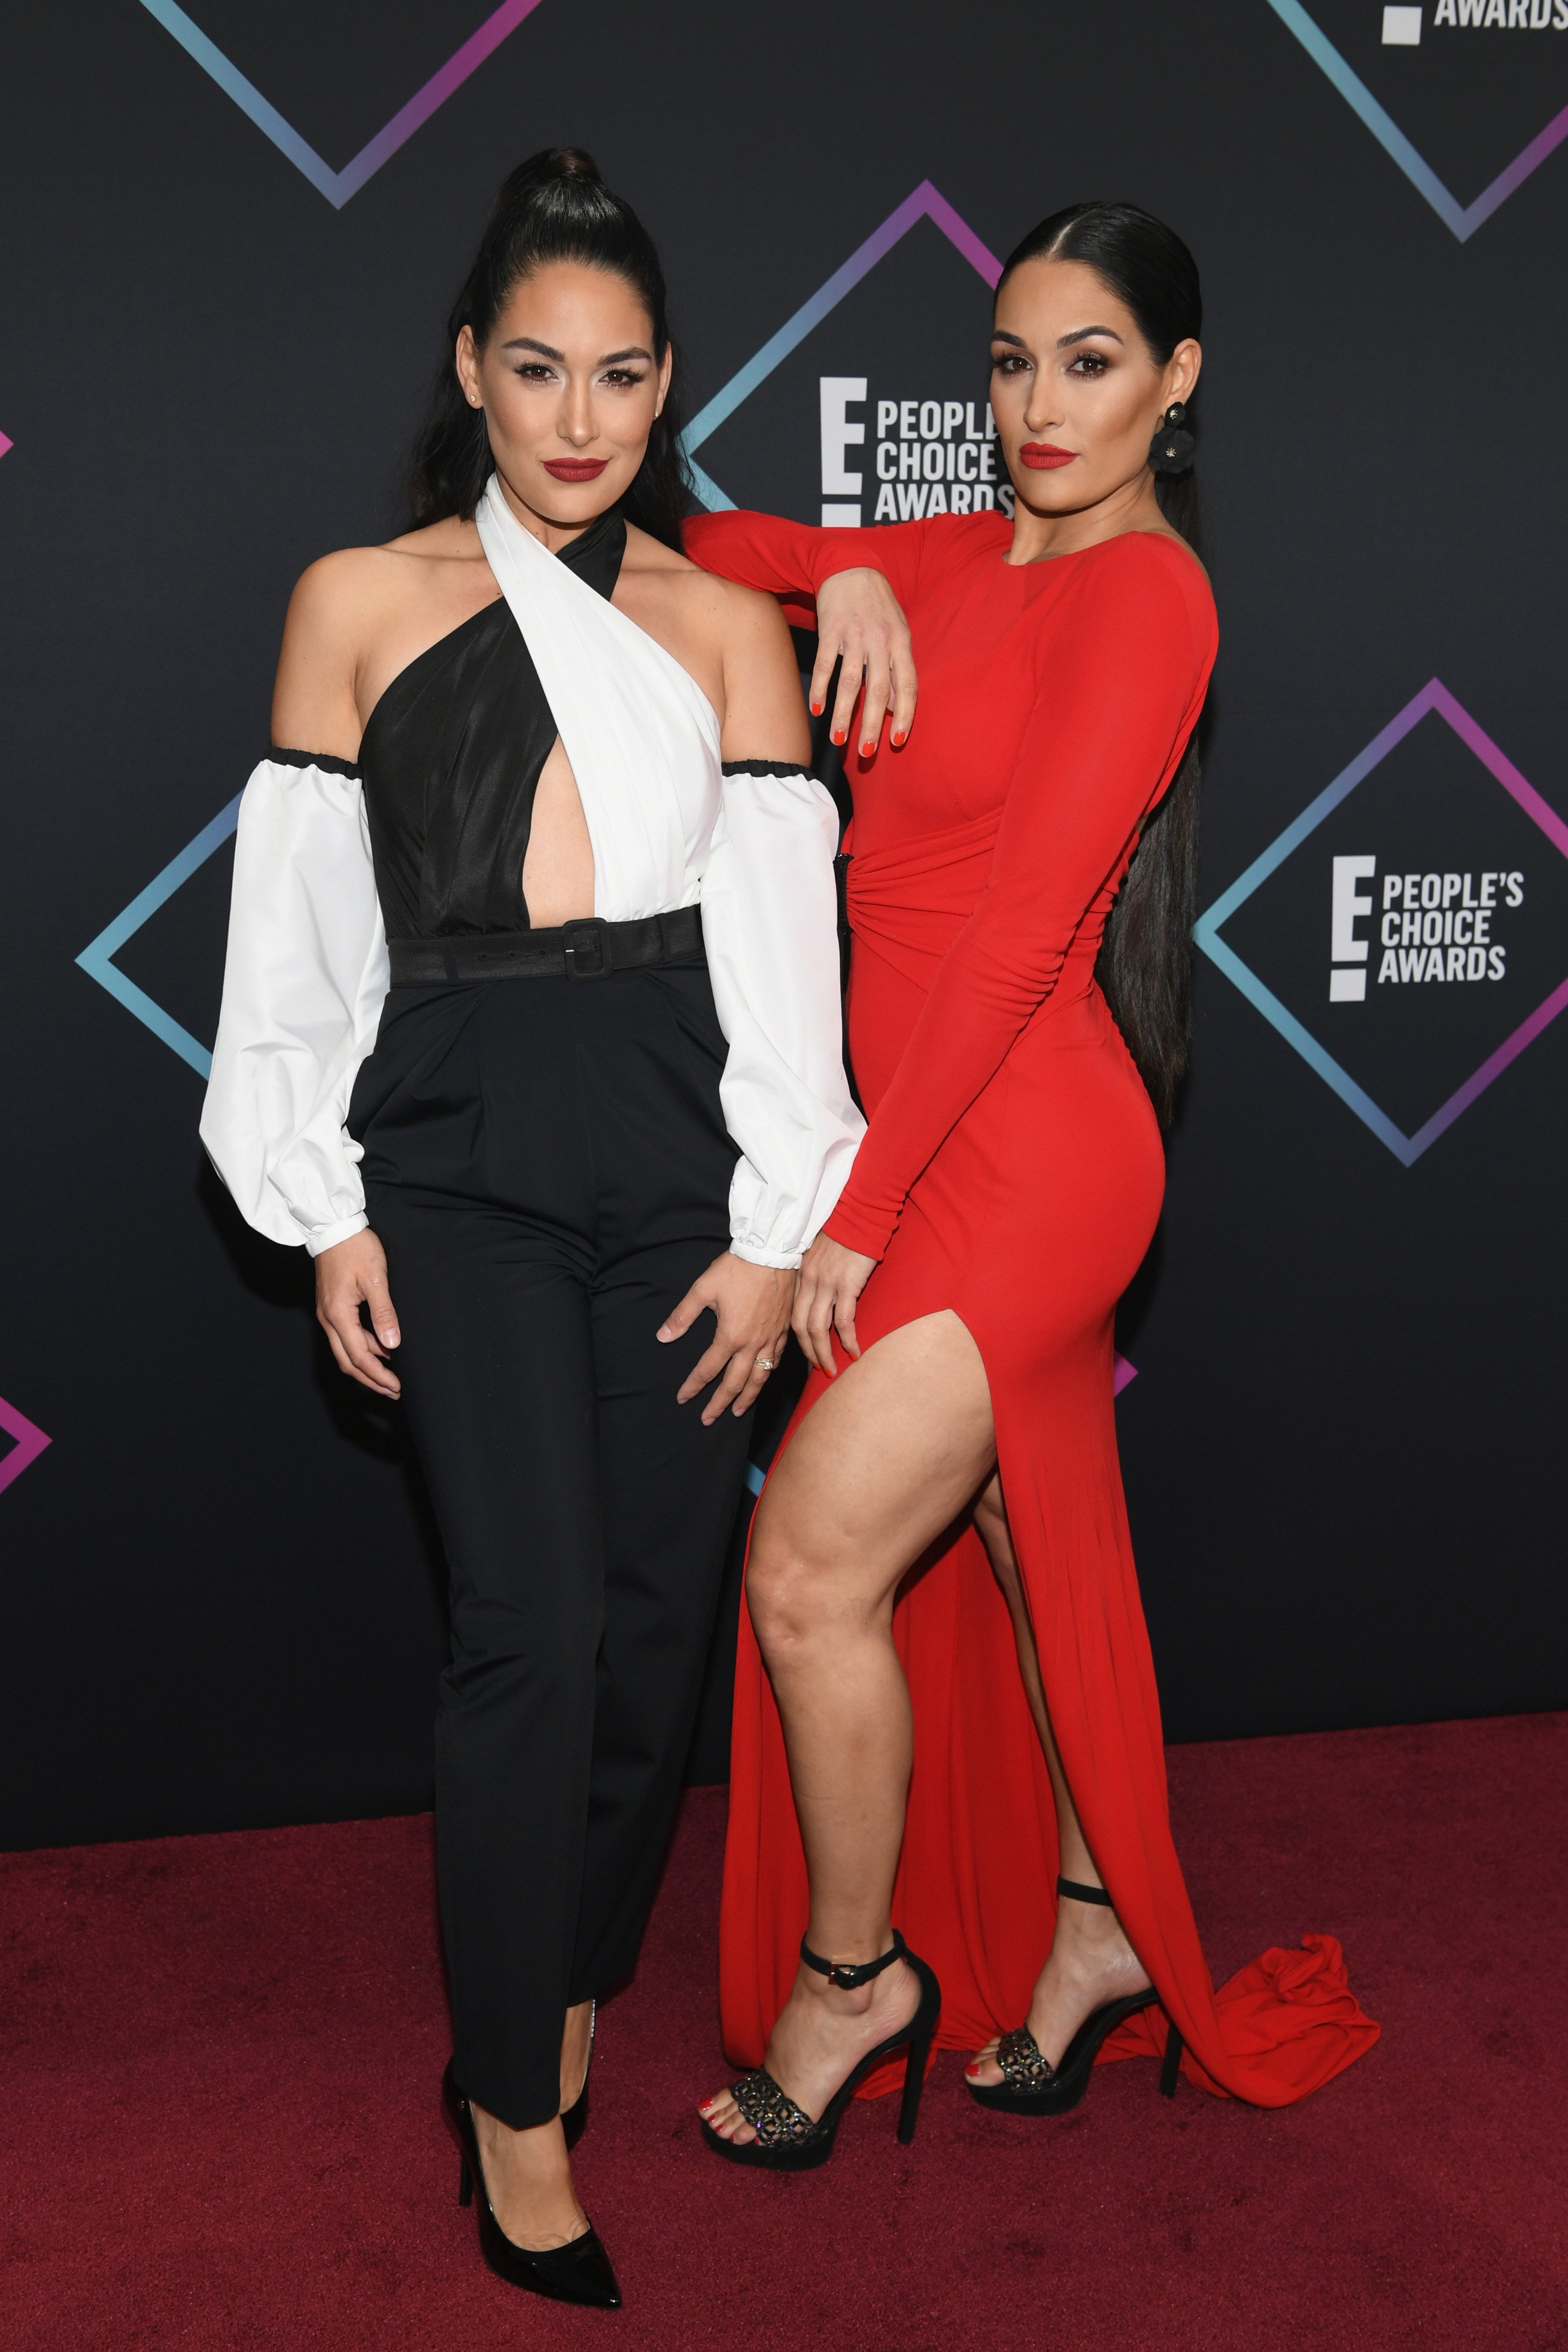 Brie and Nikki Bella attend the People's Choice Awards in Santa Monica, California on November 11, 2018 | Photo: Getty Images